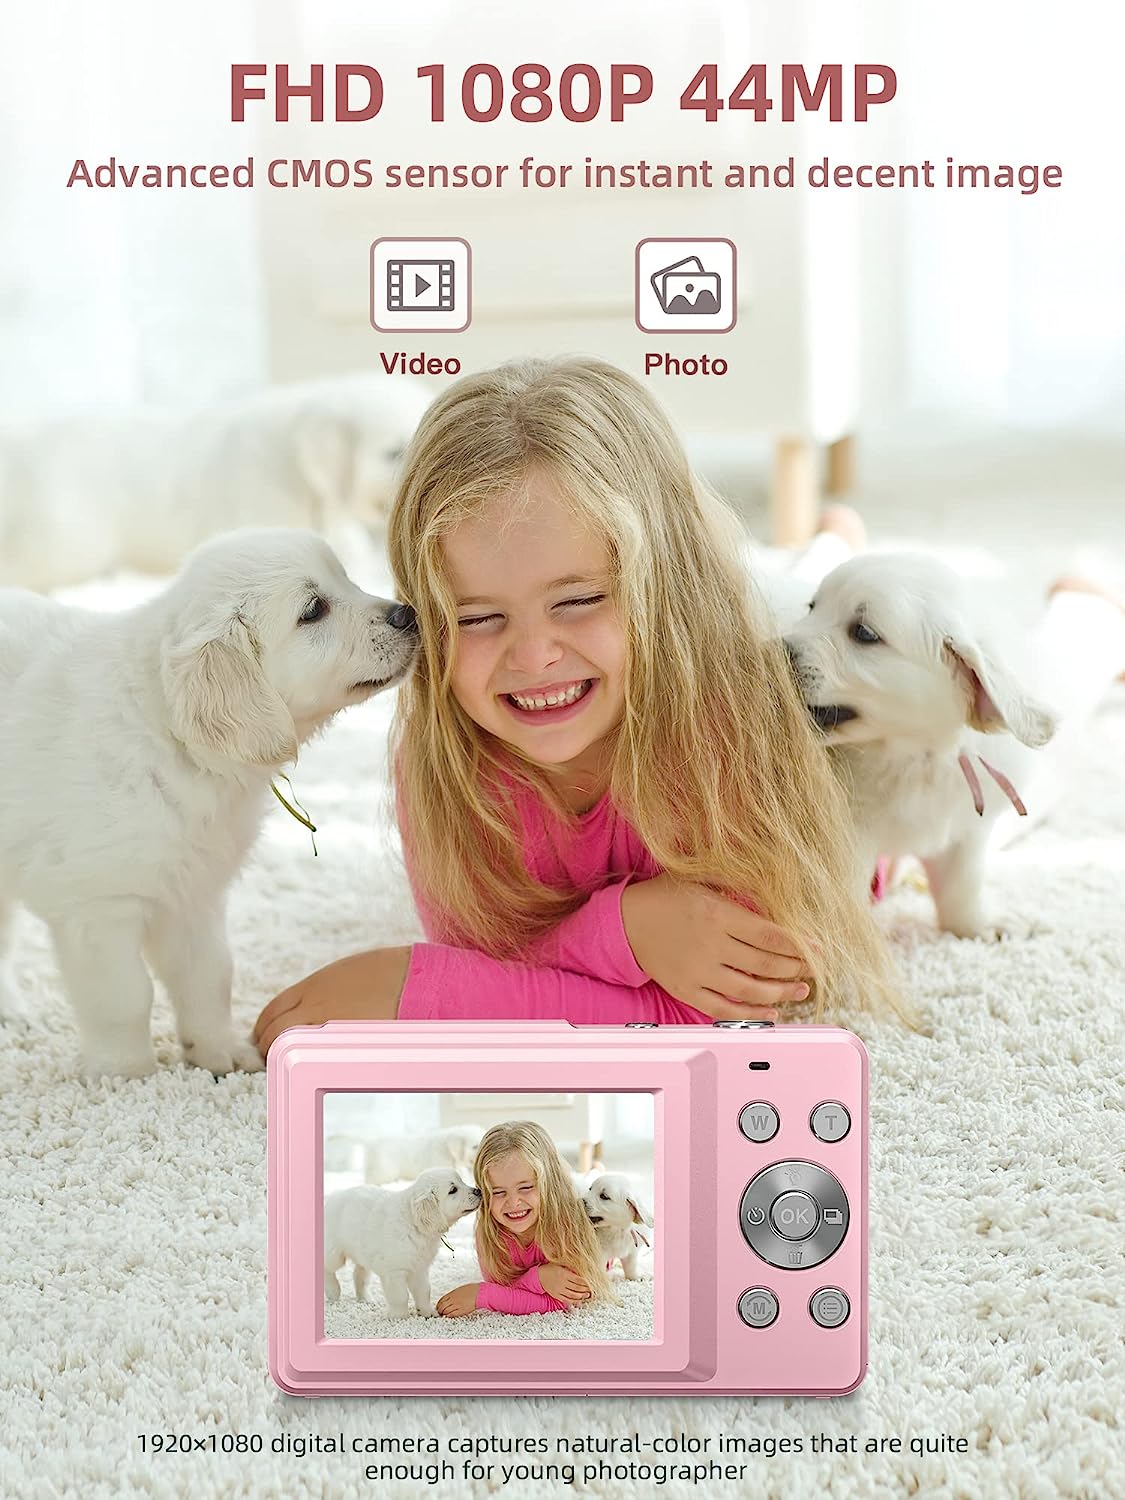 Digital Camera, FHD 1080P, Digital Tip and Shoot, 44MP for Vlogging with Anti Shake 16X Zoom, Compact, Small for Kids Boys Girls Teens Students Seniors- Pink